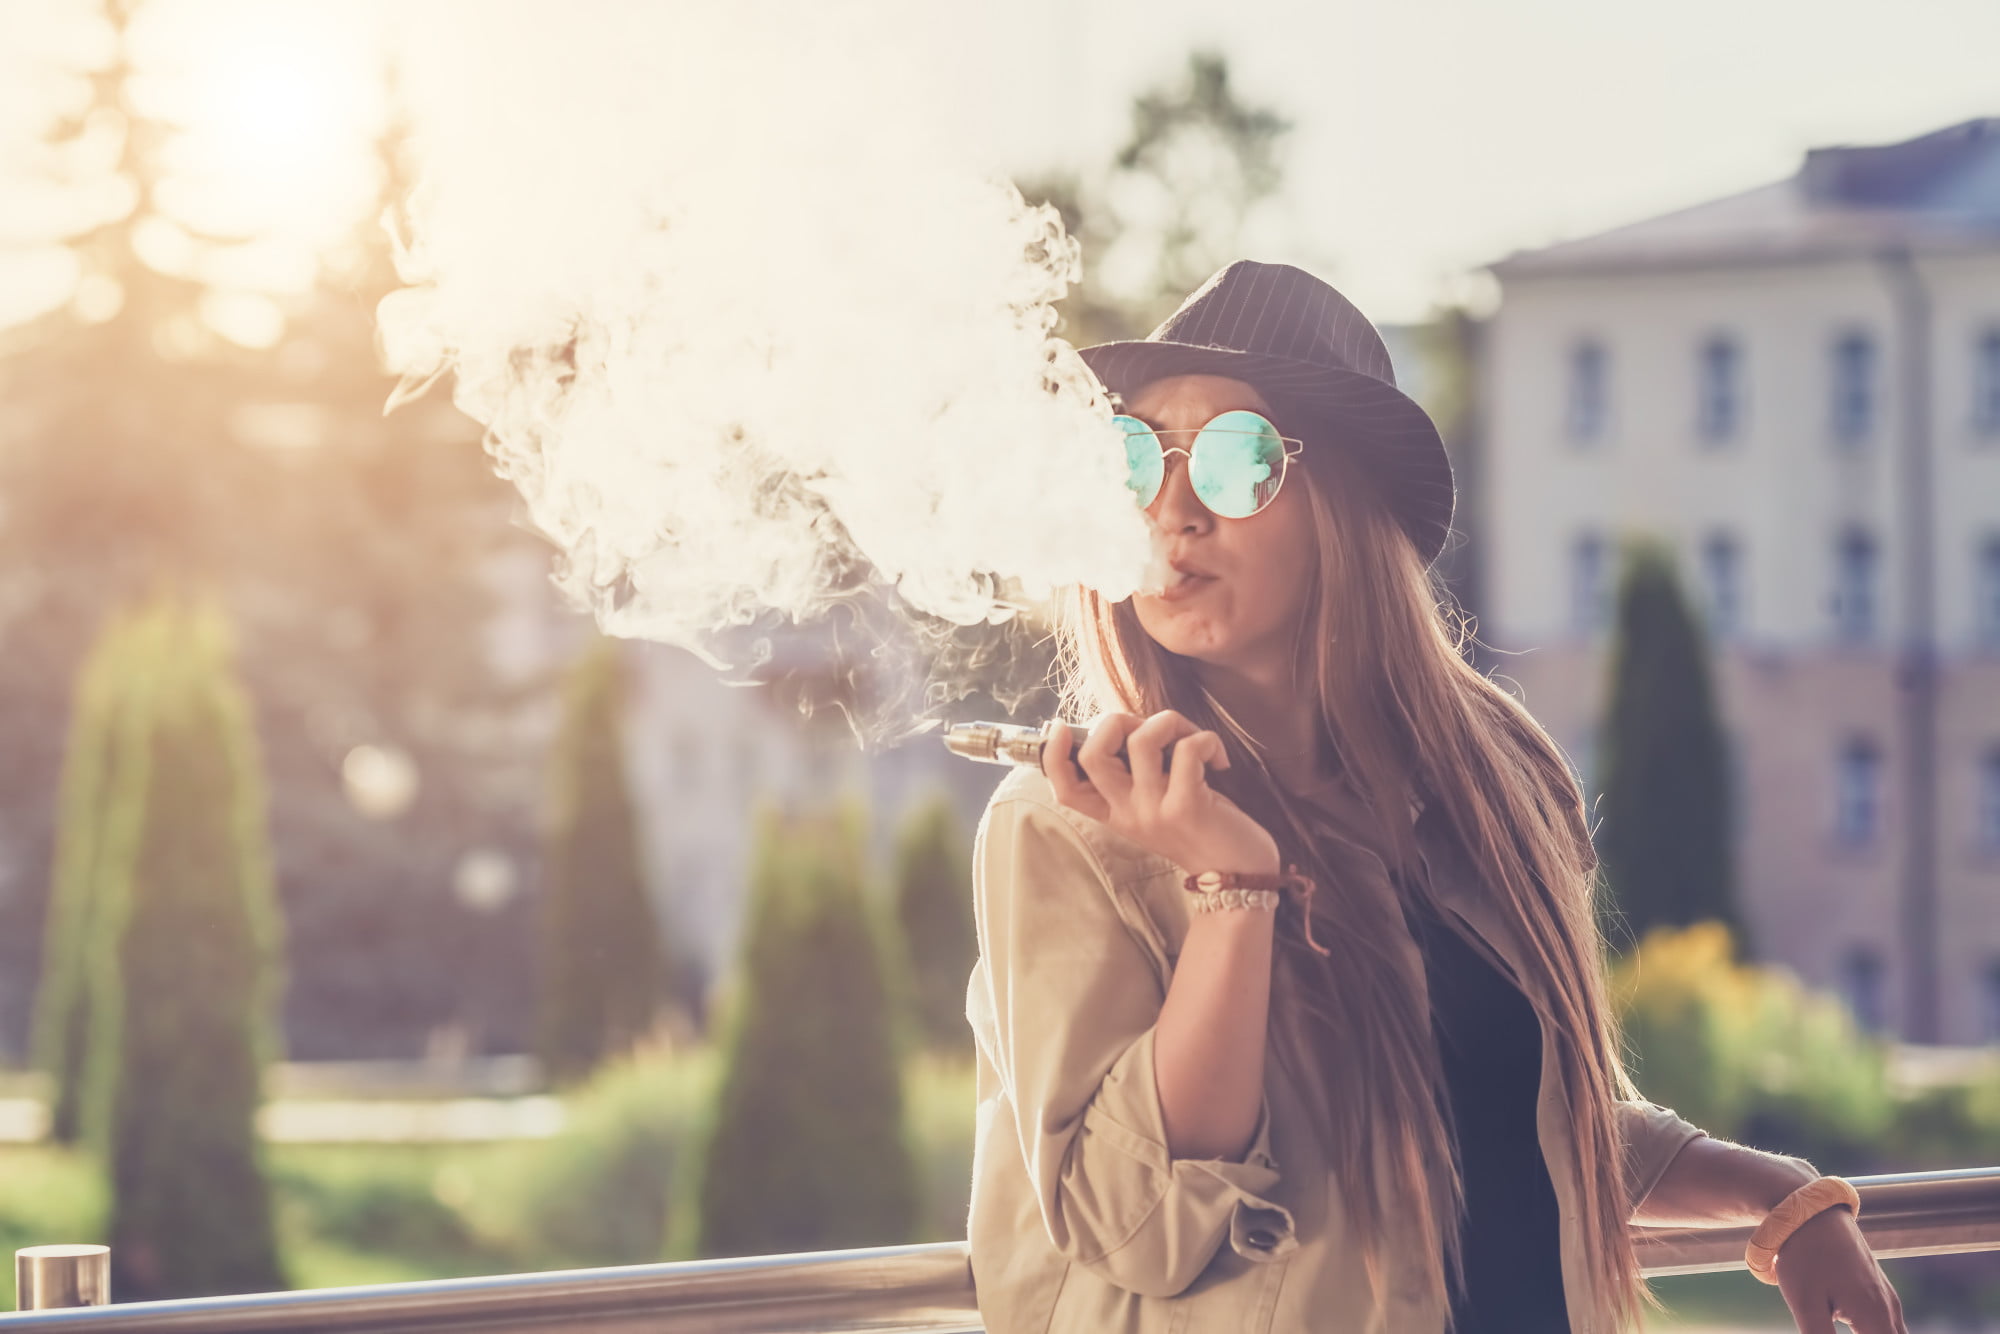 Online stores can provide the right vaping products for your needs if you know your options. Here are factors to consider when selecting online vape stores.